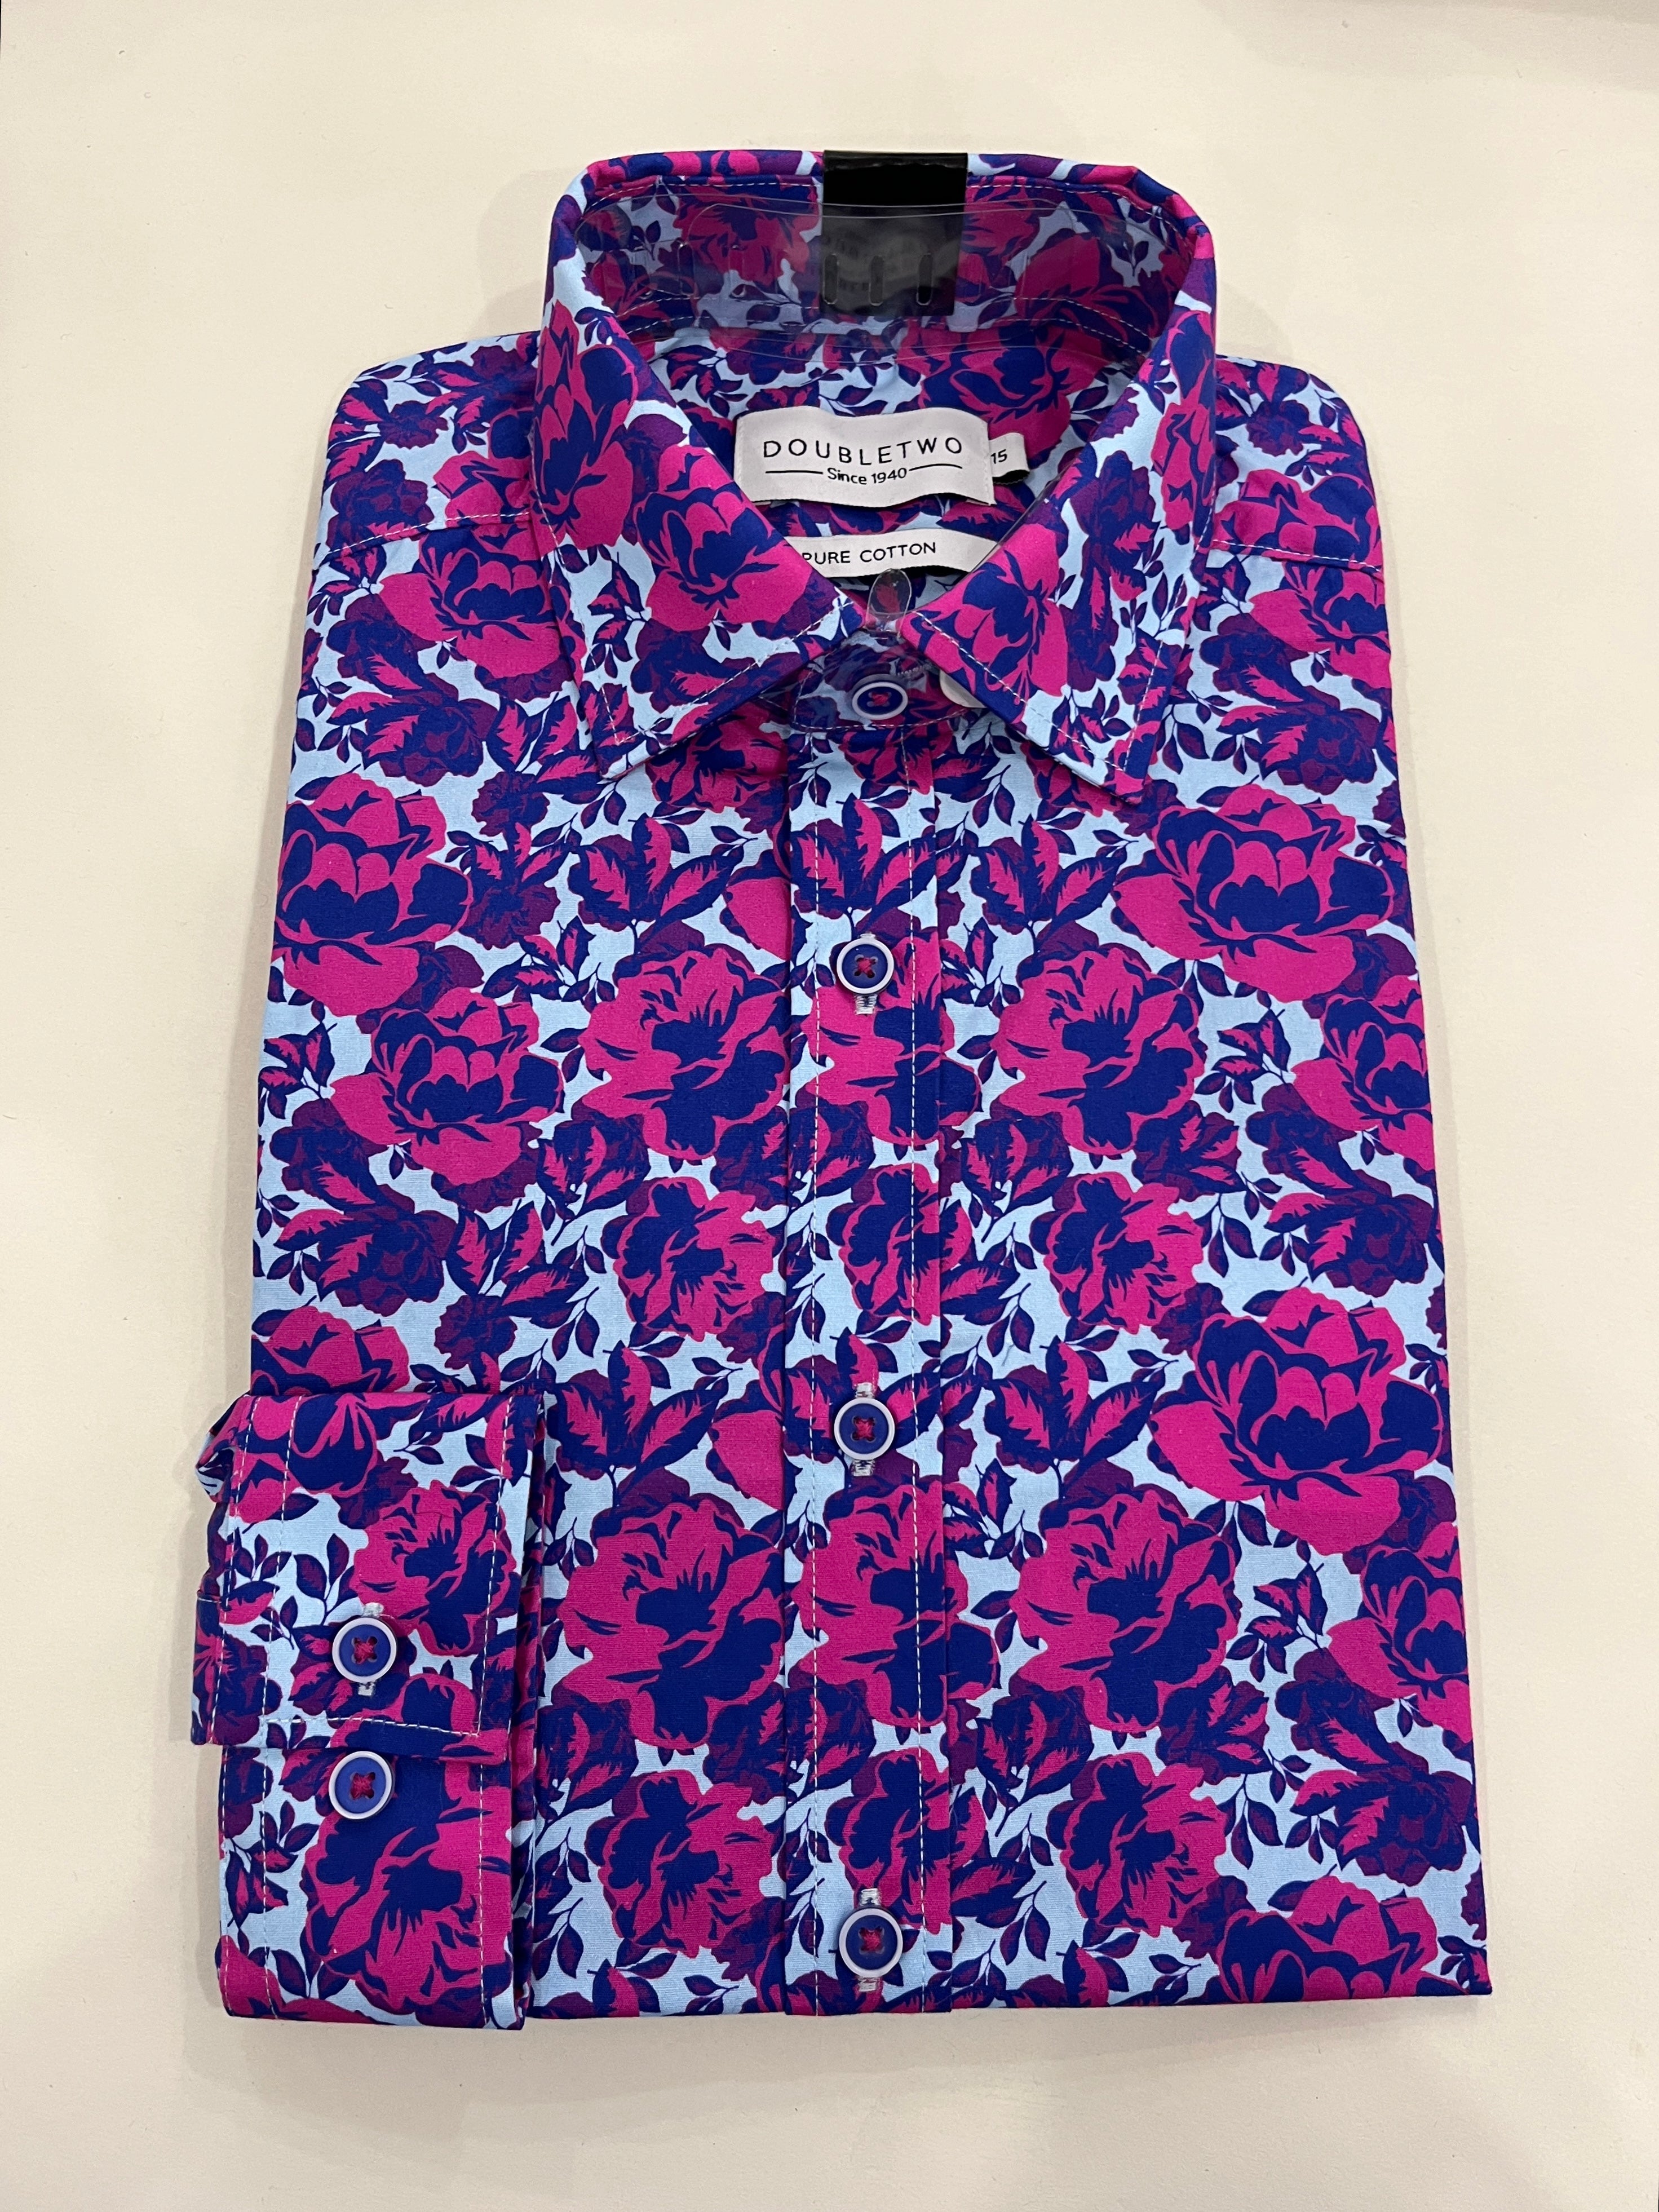 DOUBLE TWO MAGENTA, PURPLE AND NAVY BIG FLOWER PRINT LIGHT BLUE SHIRT